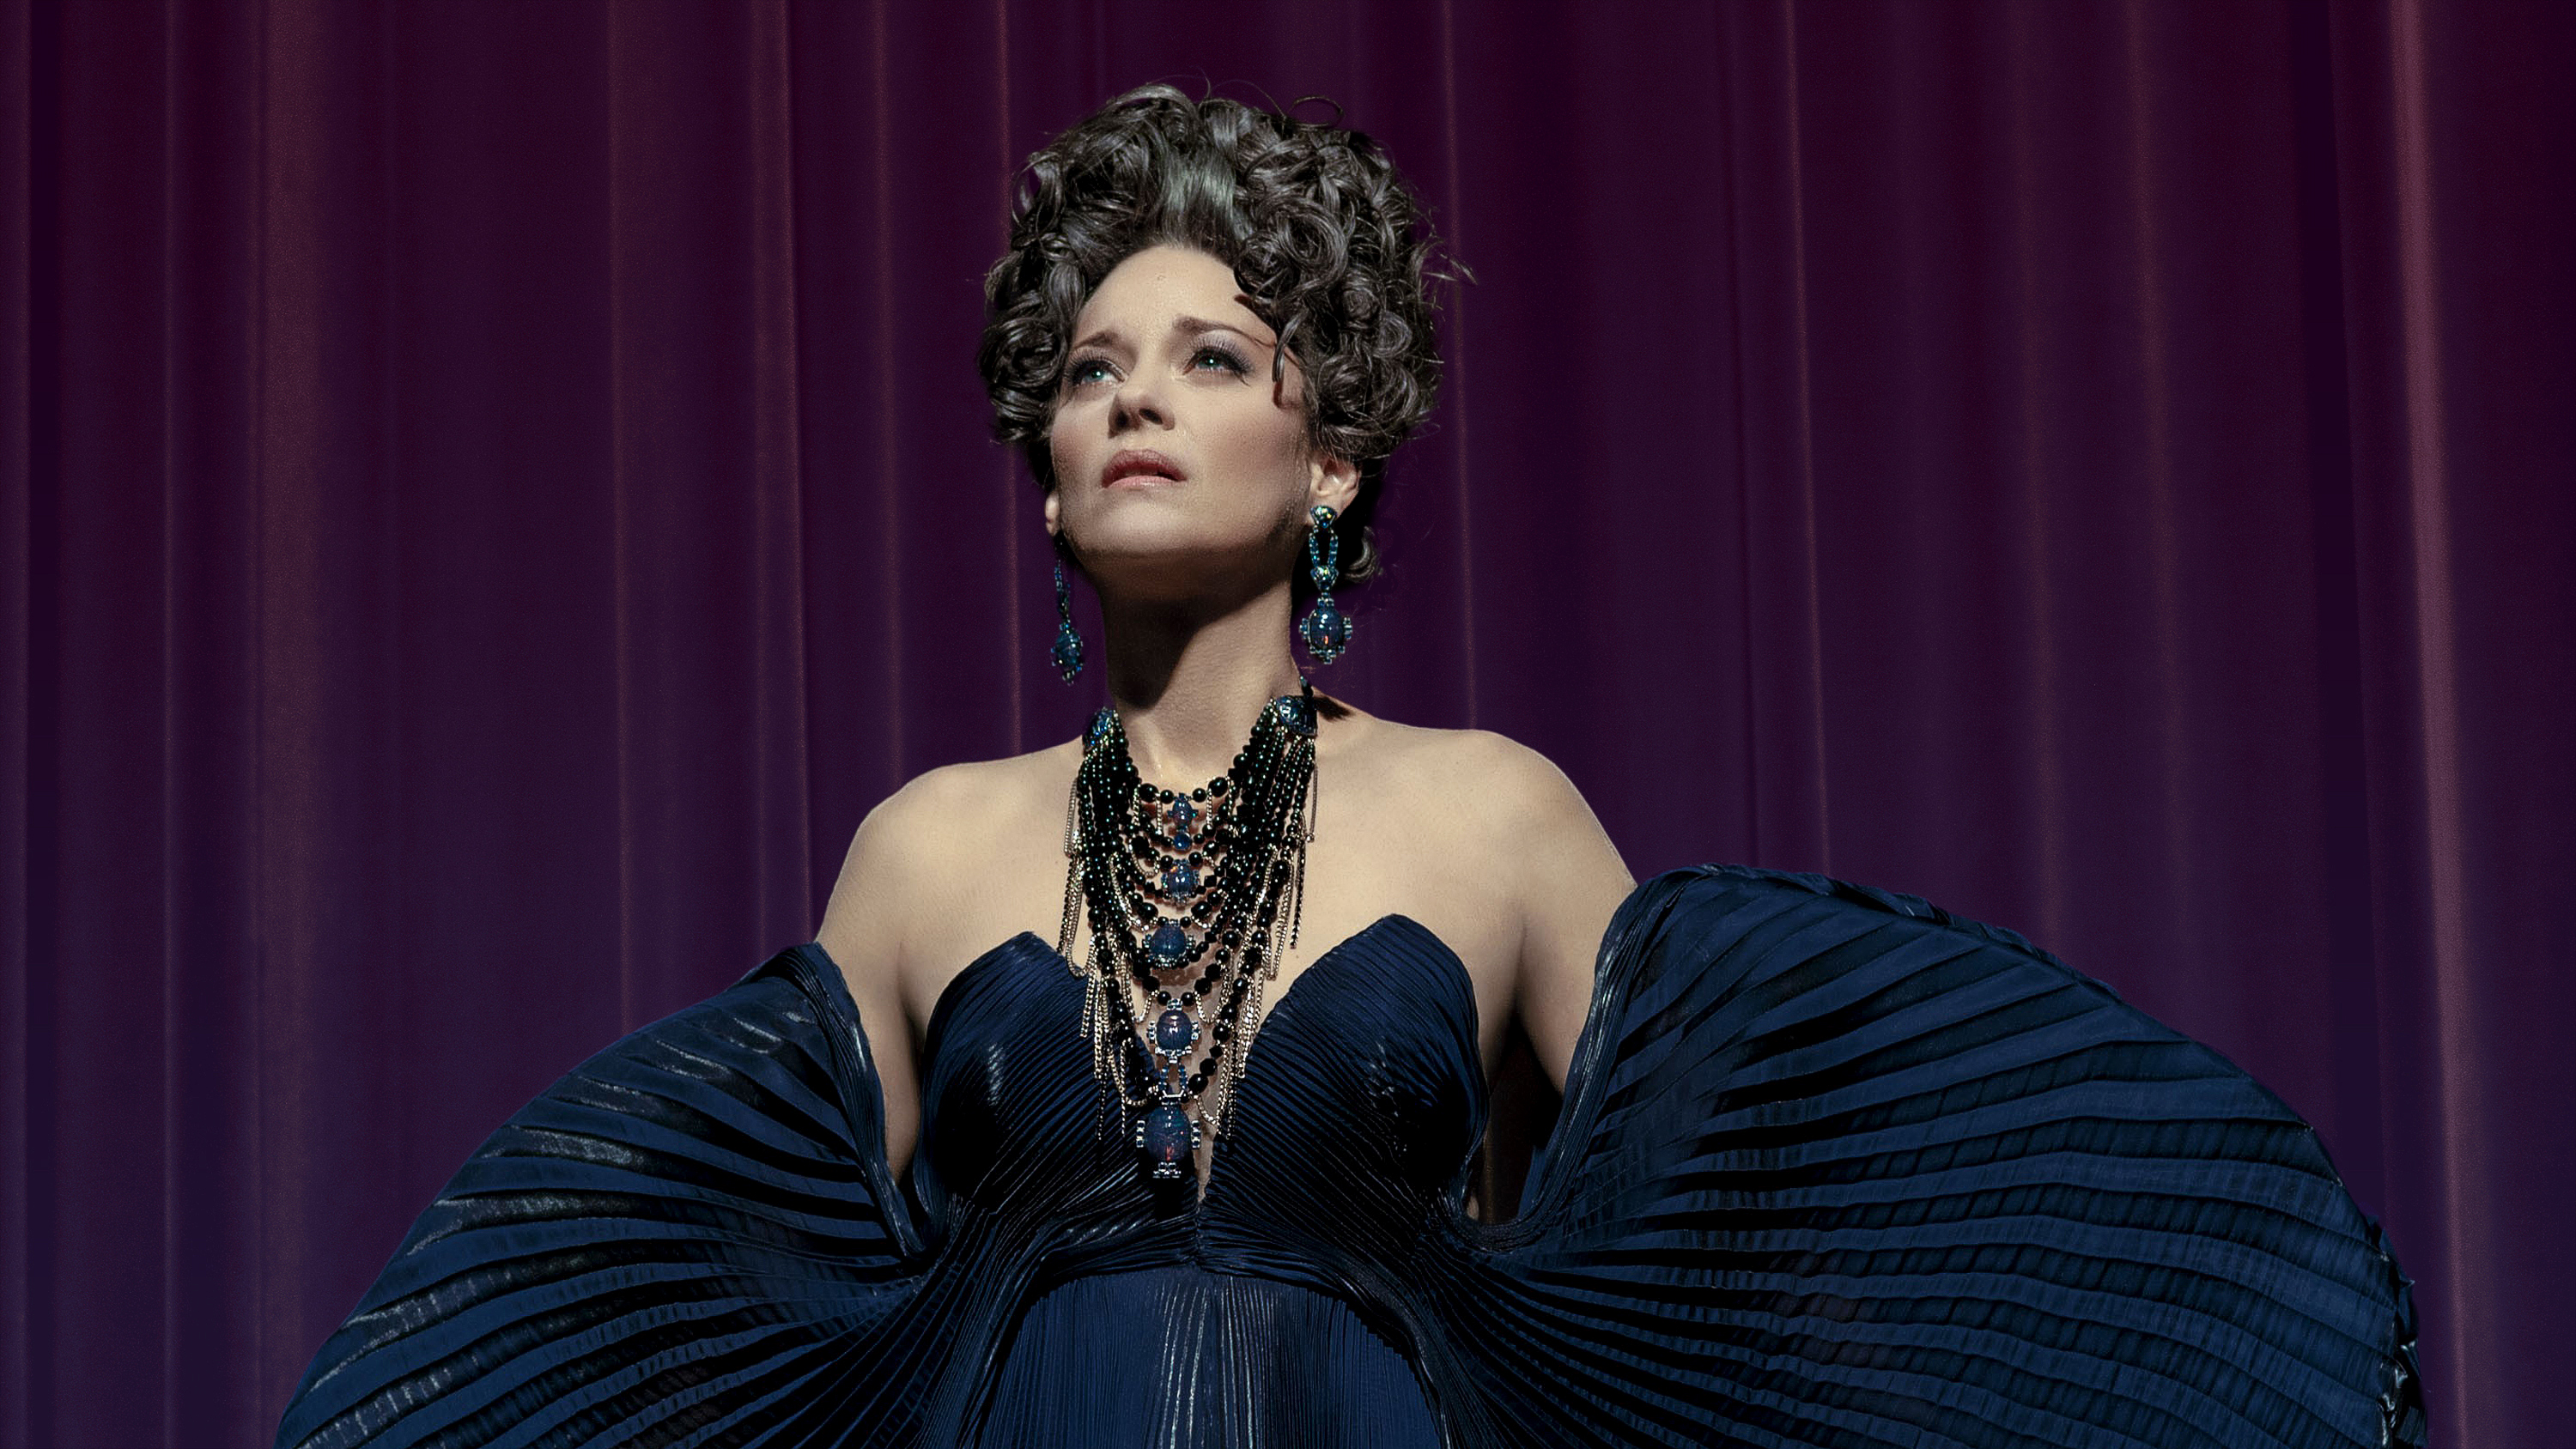 Actress Marion Cotillard on stage in the movie Annette